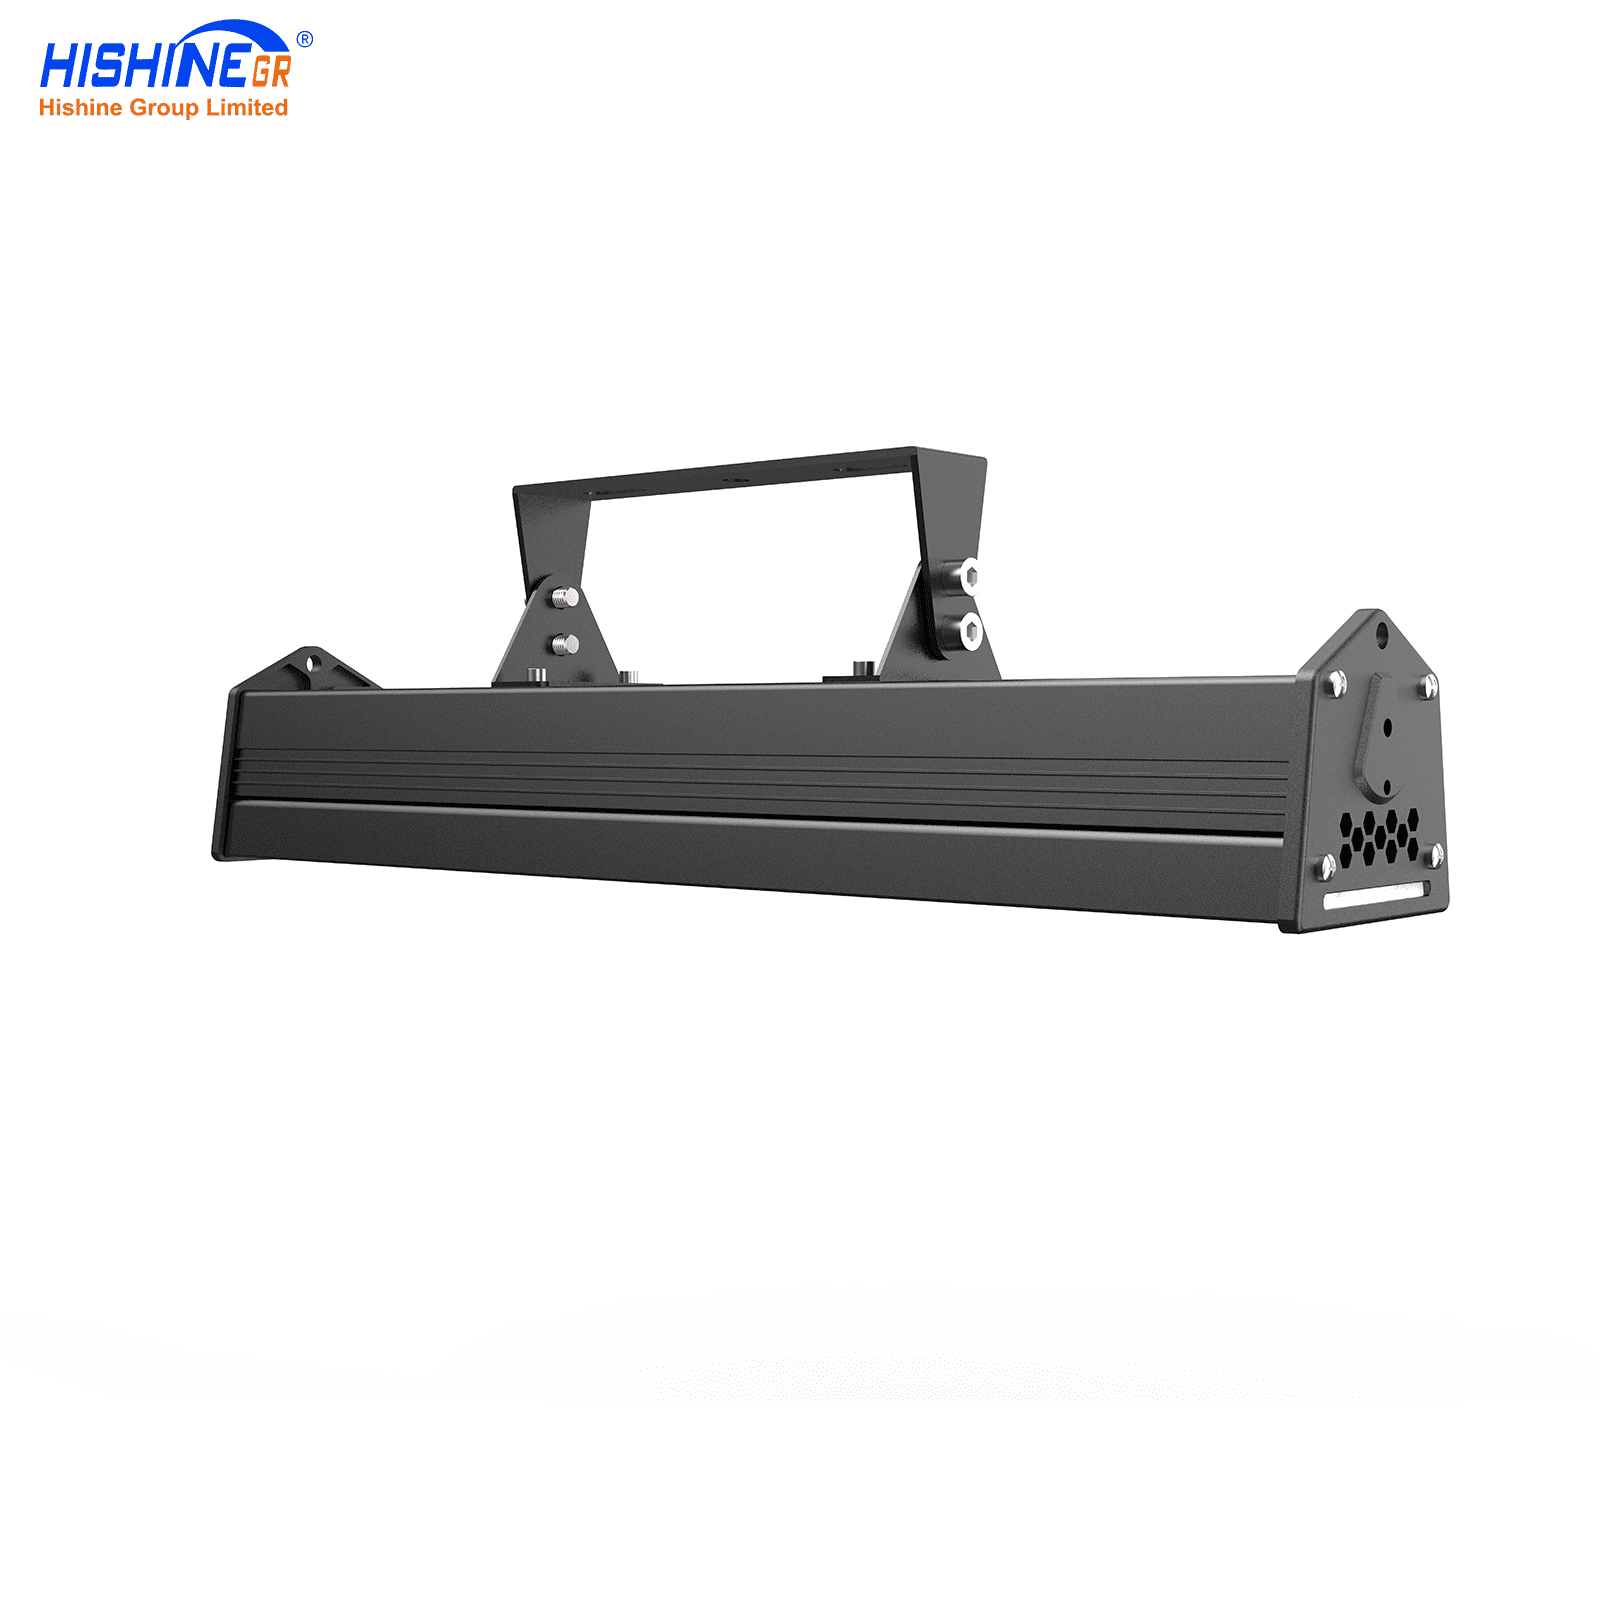 K11 Linear Light The Best Low Bay Light For You